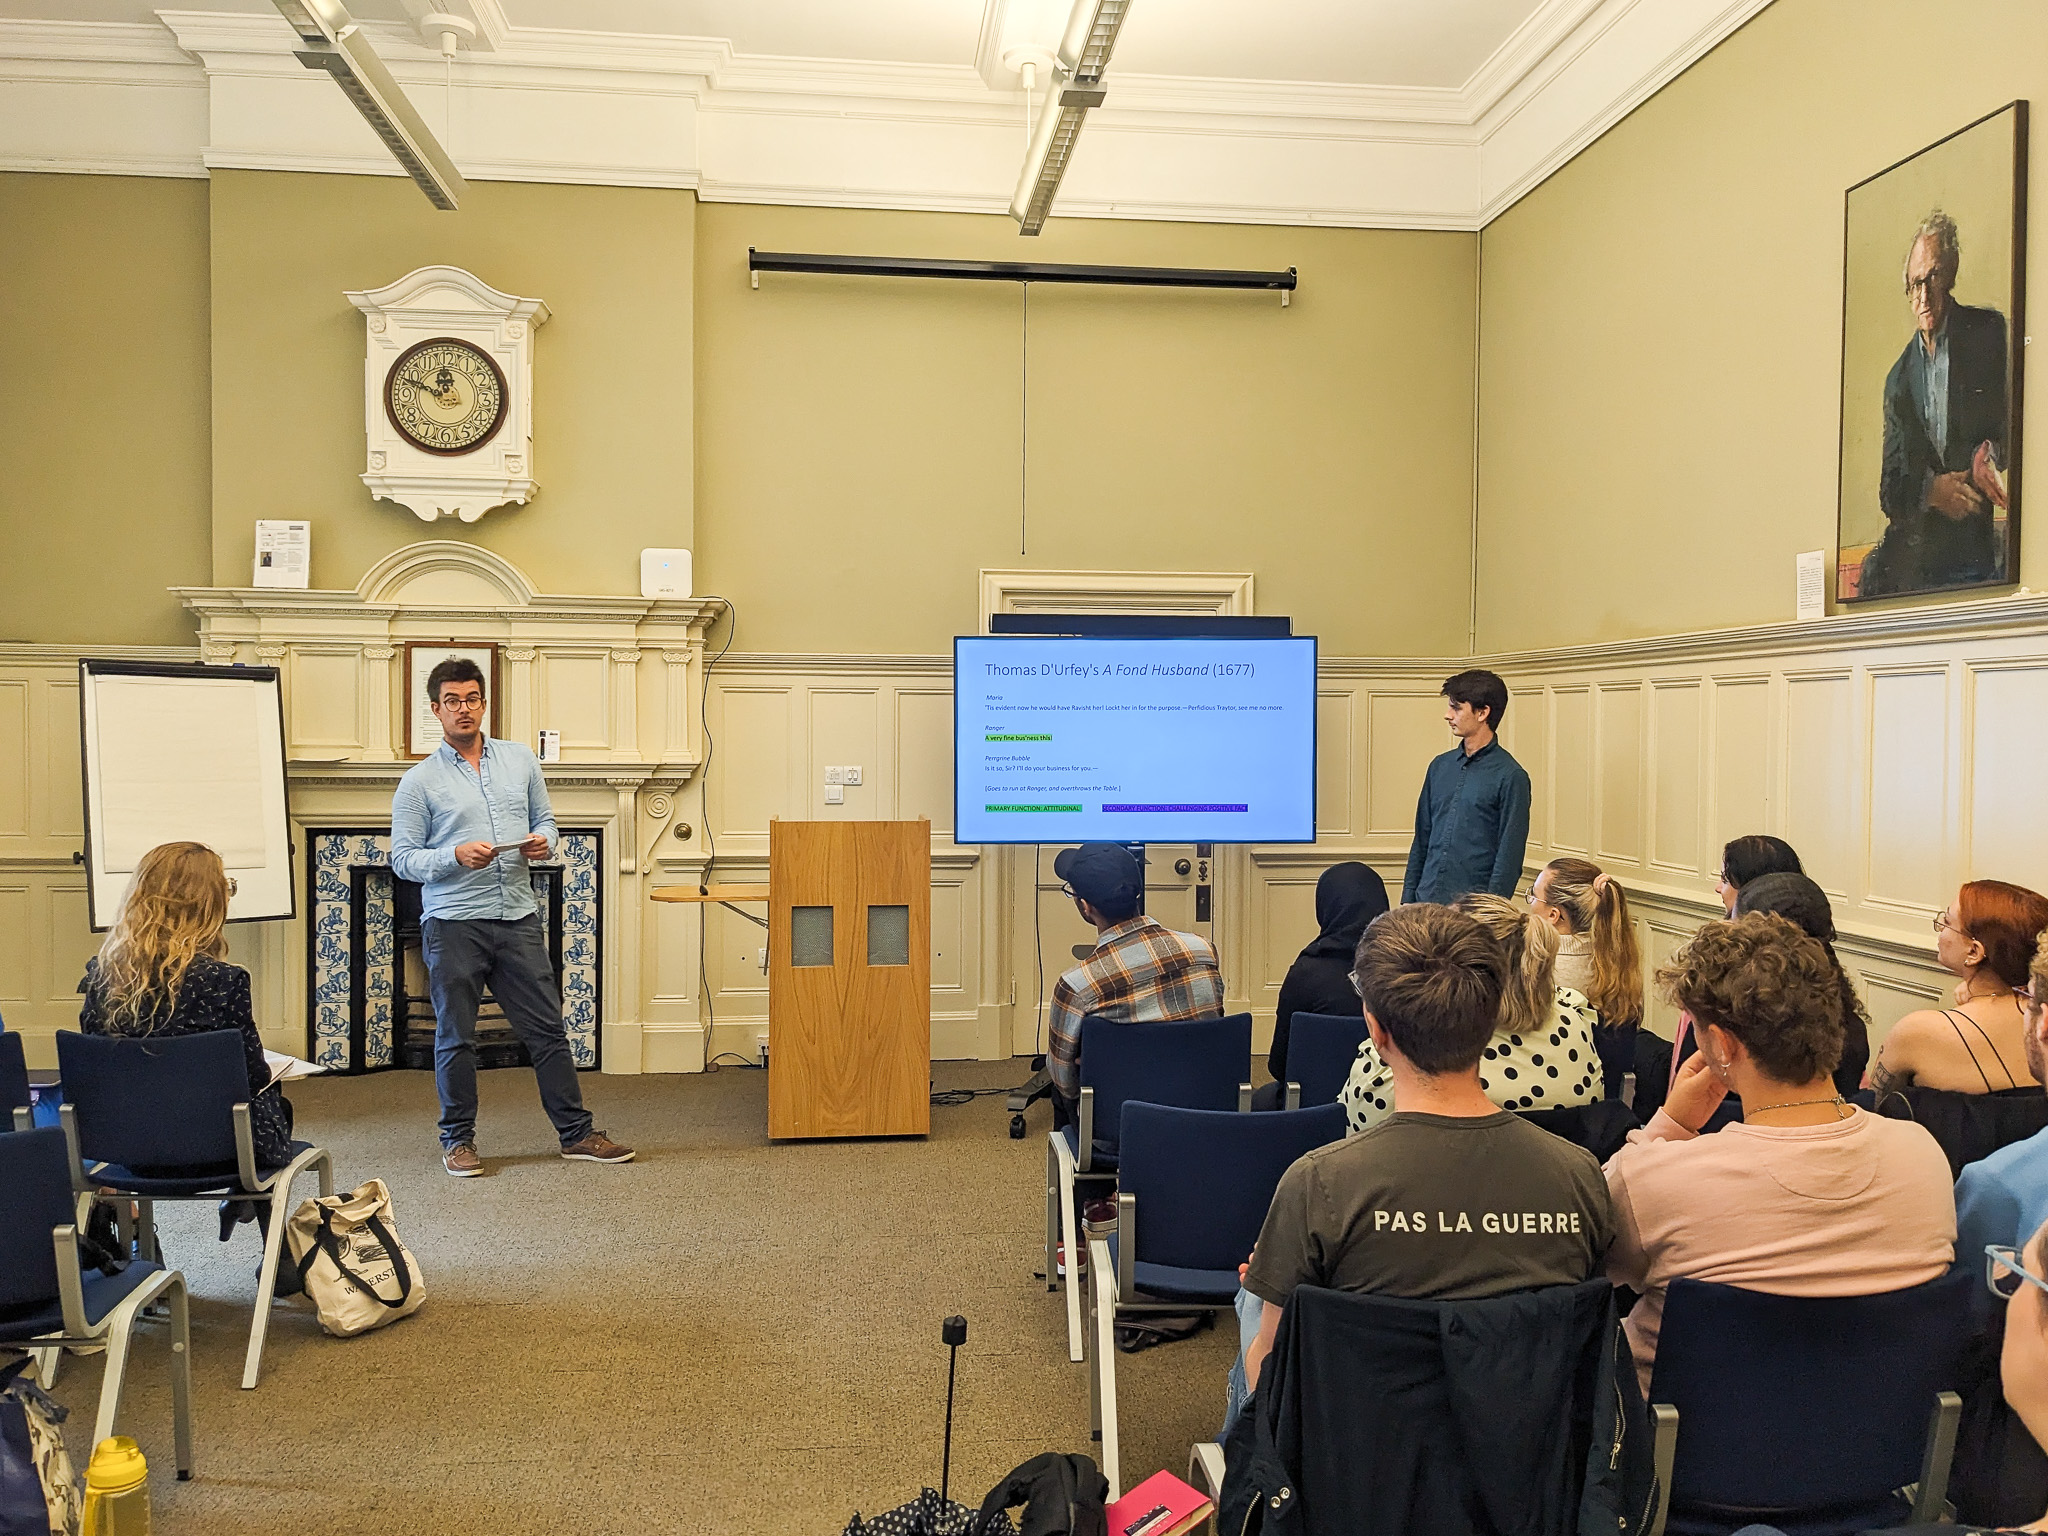 Daniel Street and Dylan Ryder present the results of their research project in the Exam Schools